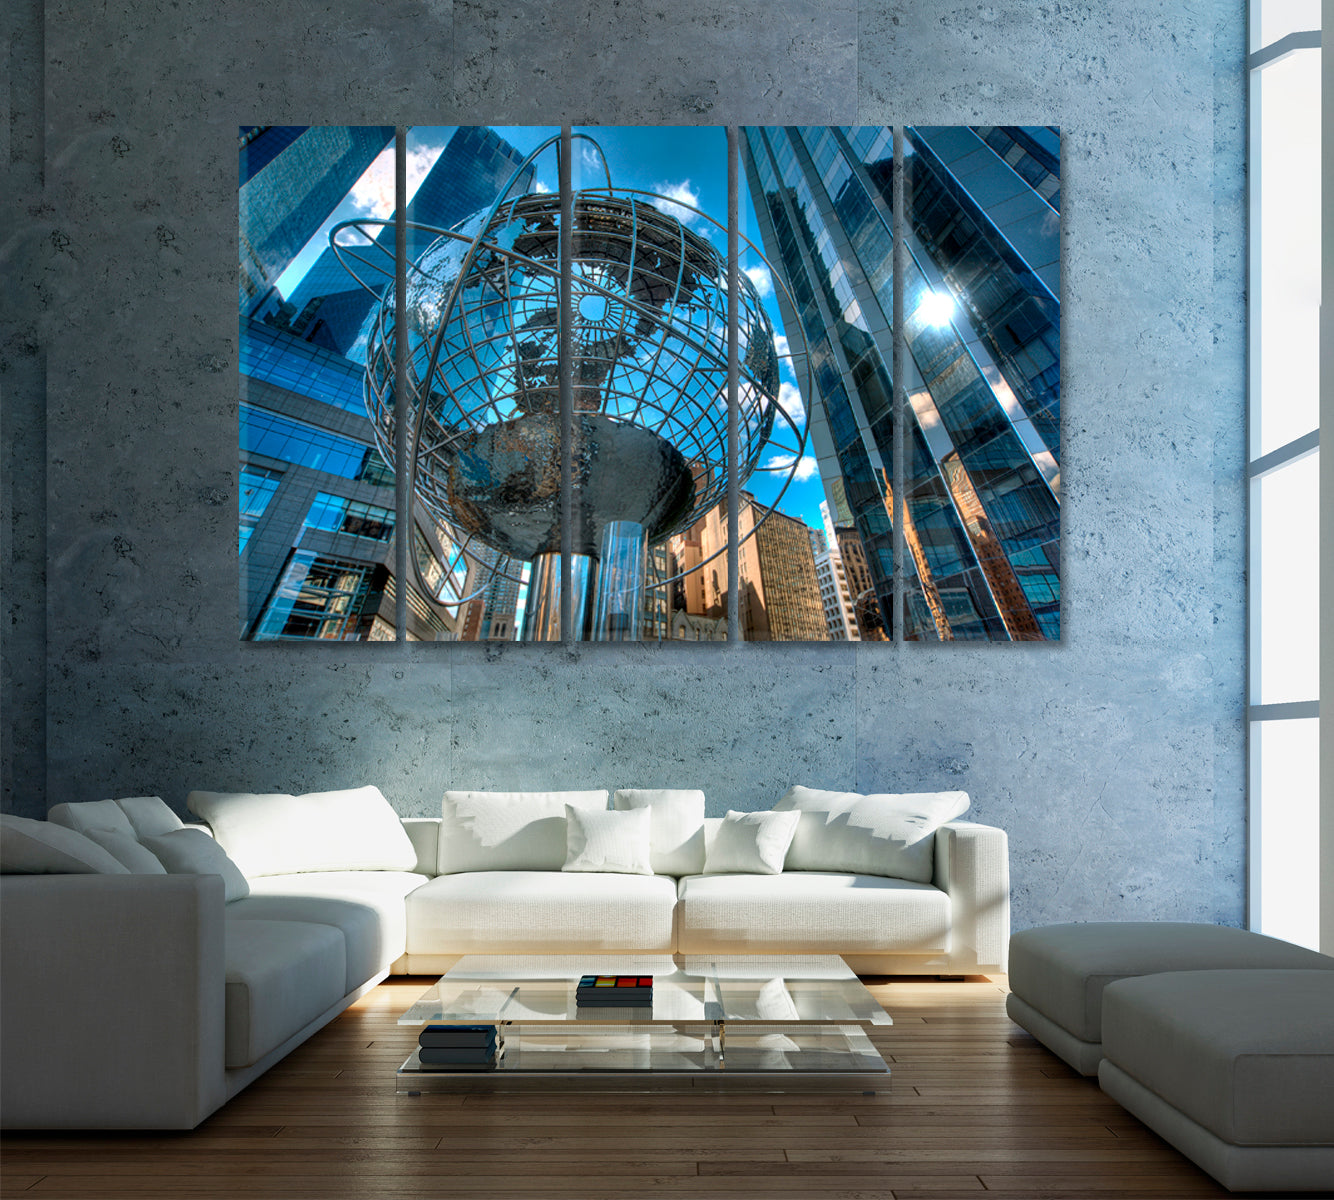 Silver Globe of Trump Tower New York Canvas Print ArtLexy 5 Panels 36"x24" inches 